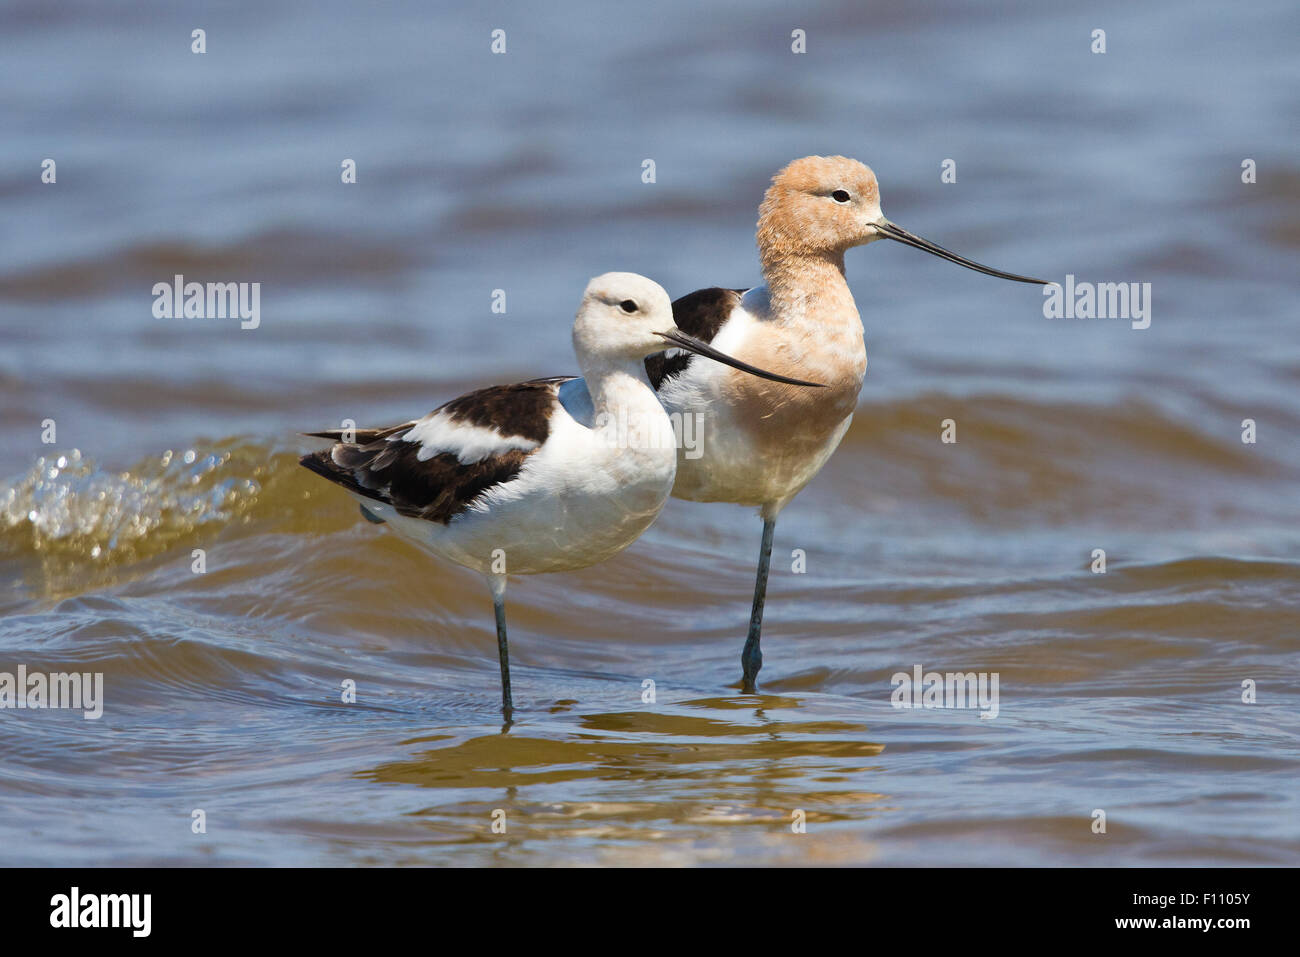 Male and Female American Avocet birds, or Recurvirostra americana, standing in along the shoreline of the Gulf of Mexico Stock Photo